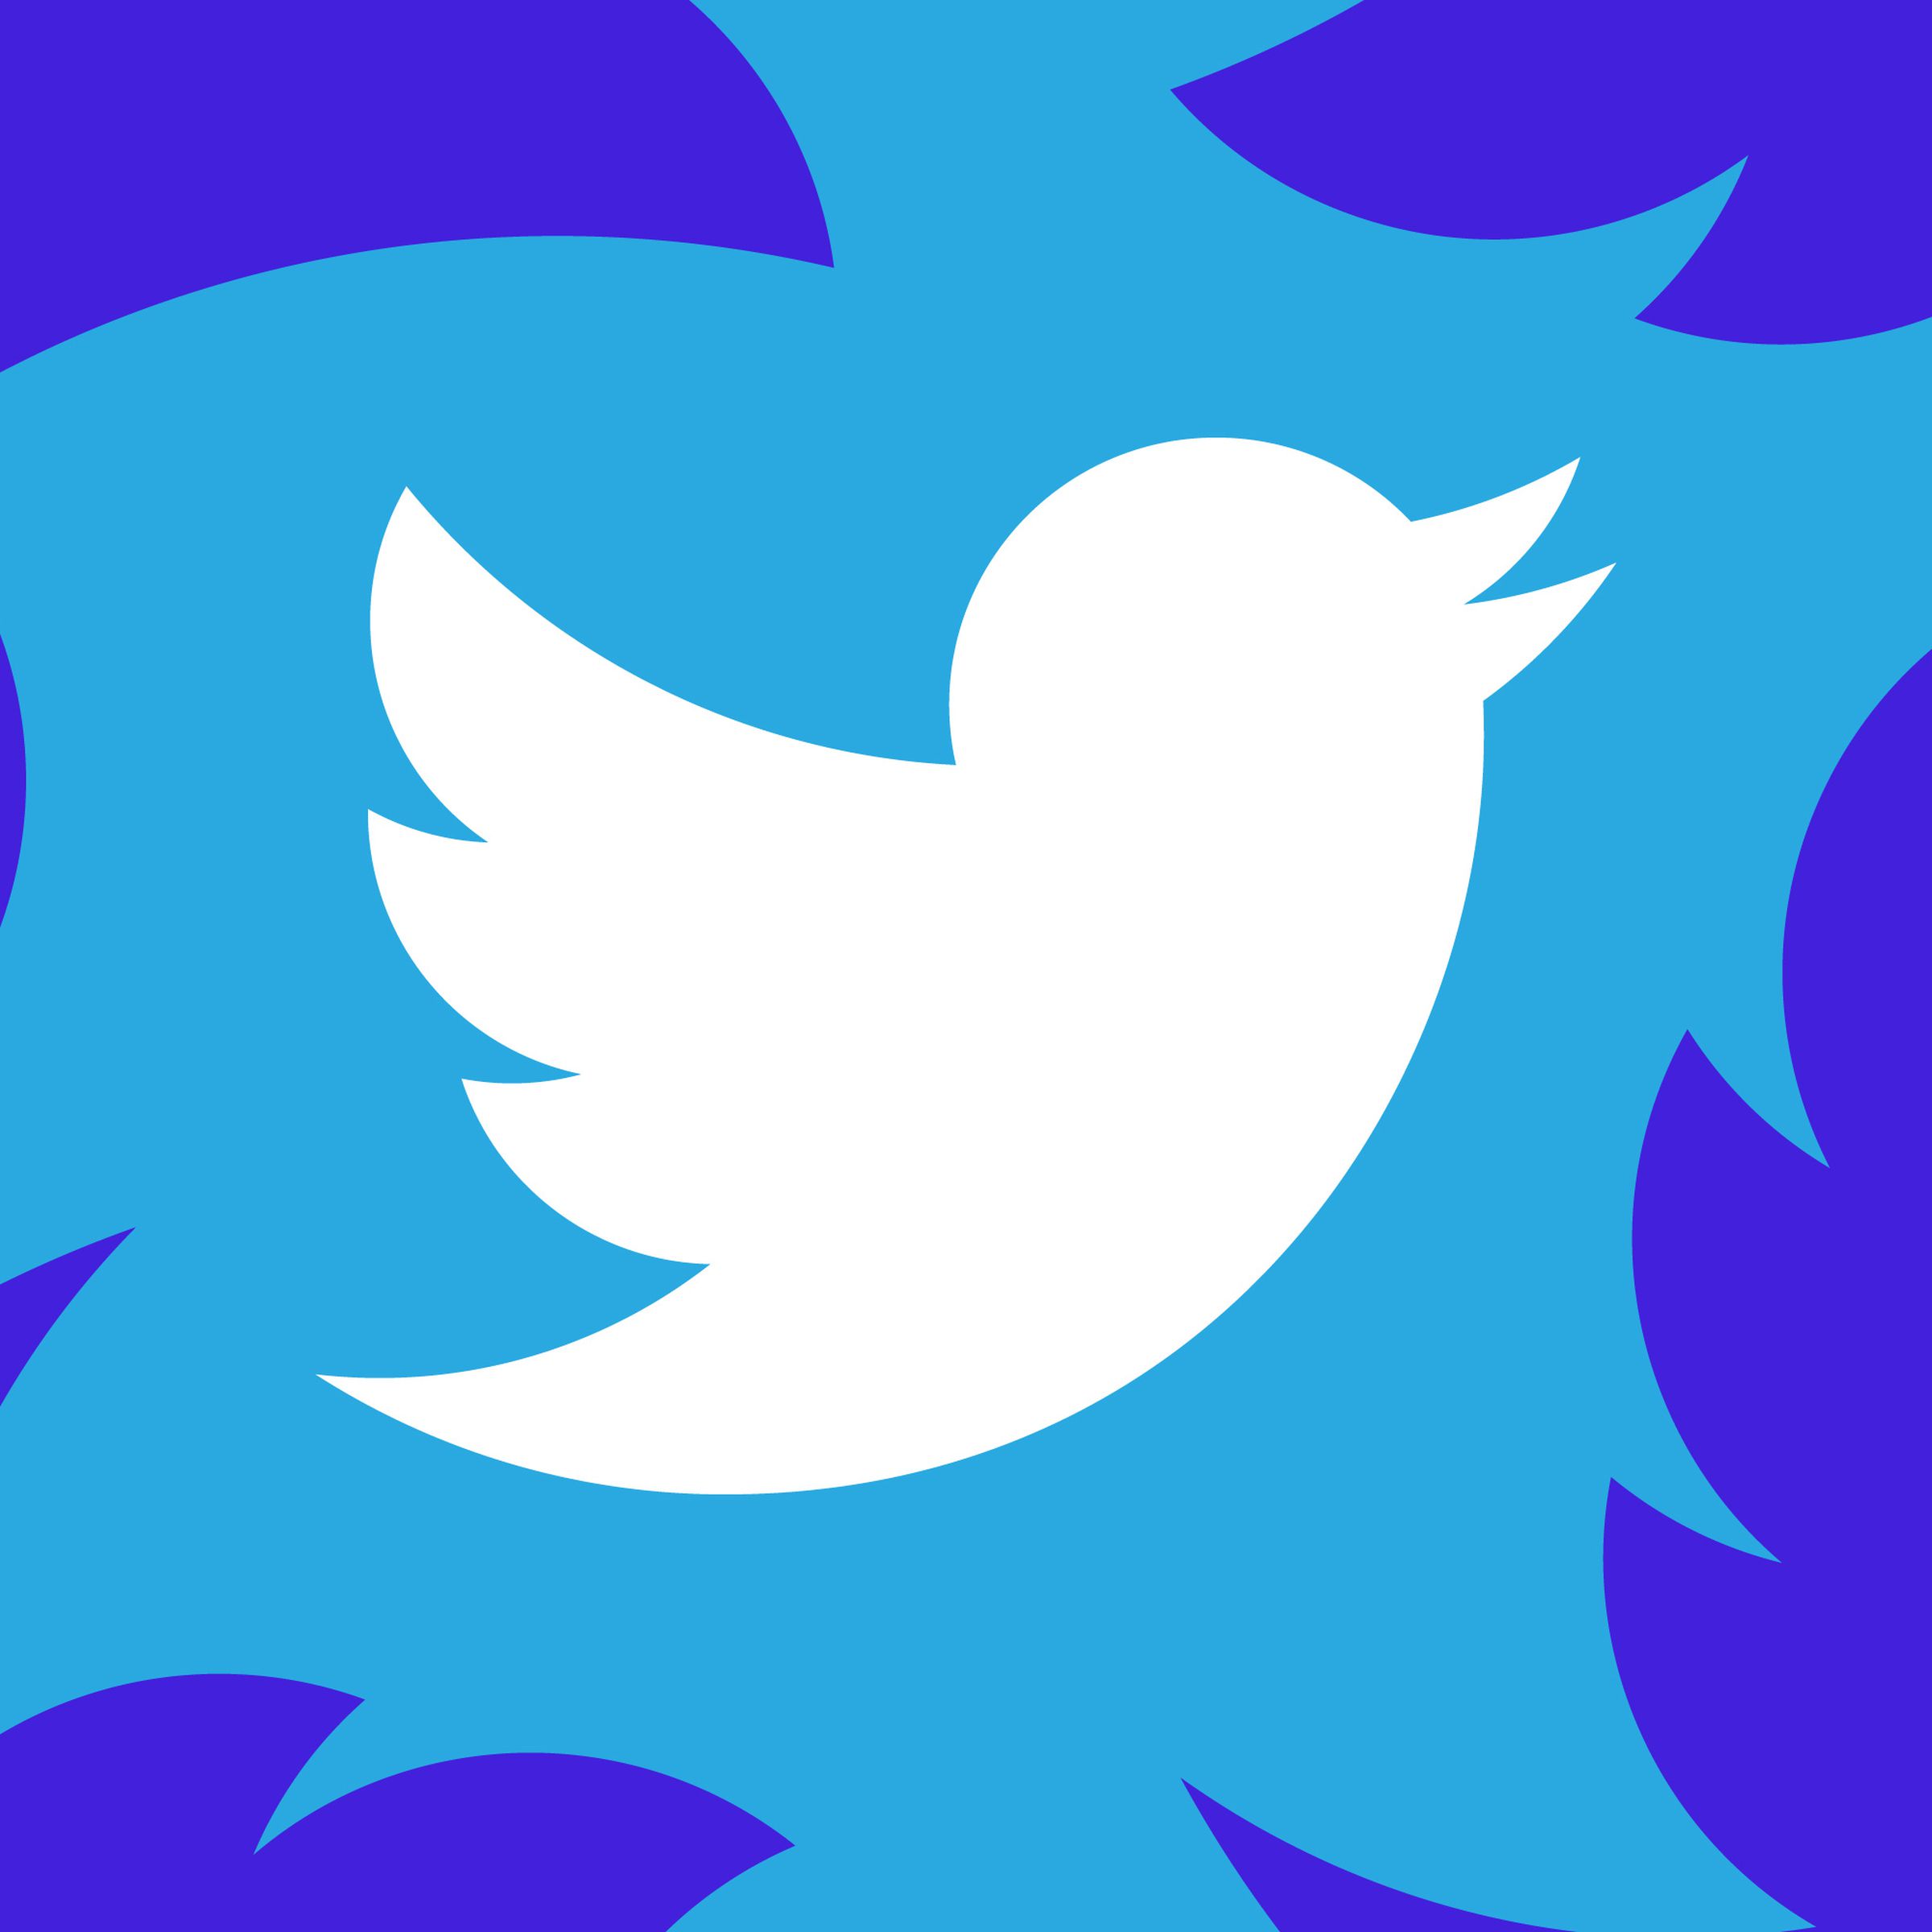 Twitter bird logo in white over a blue and purple background